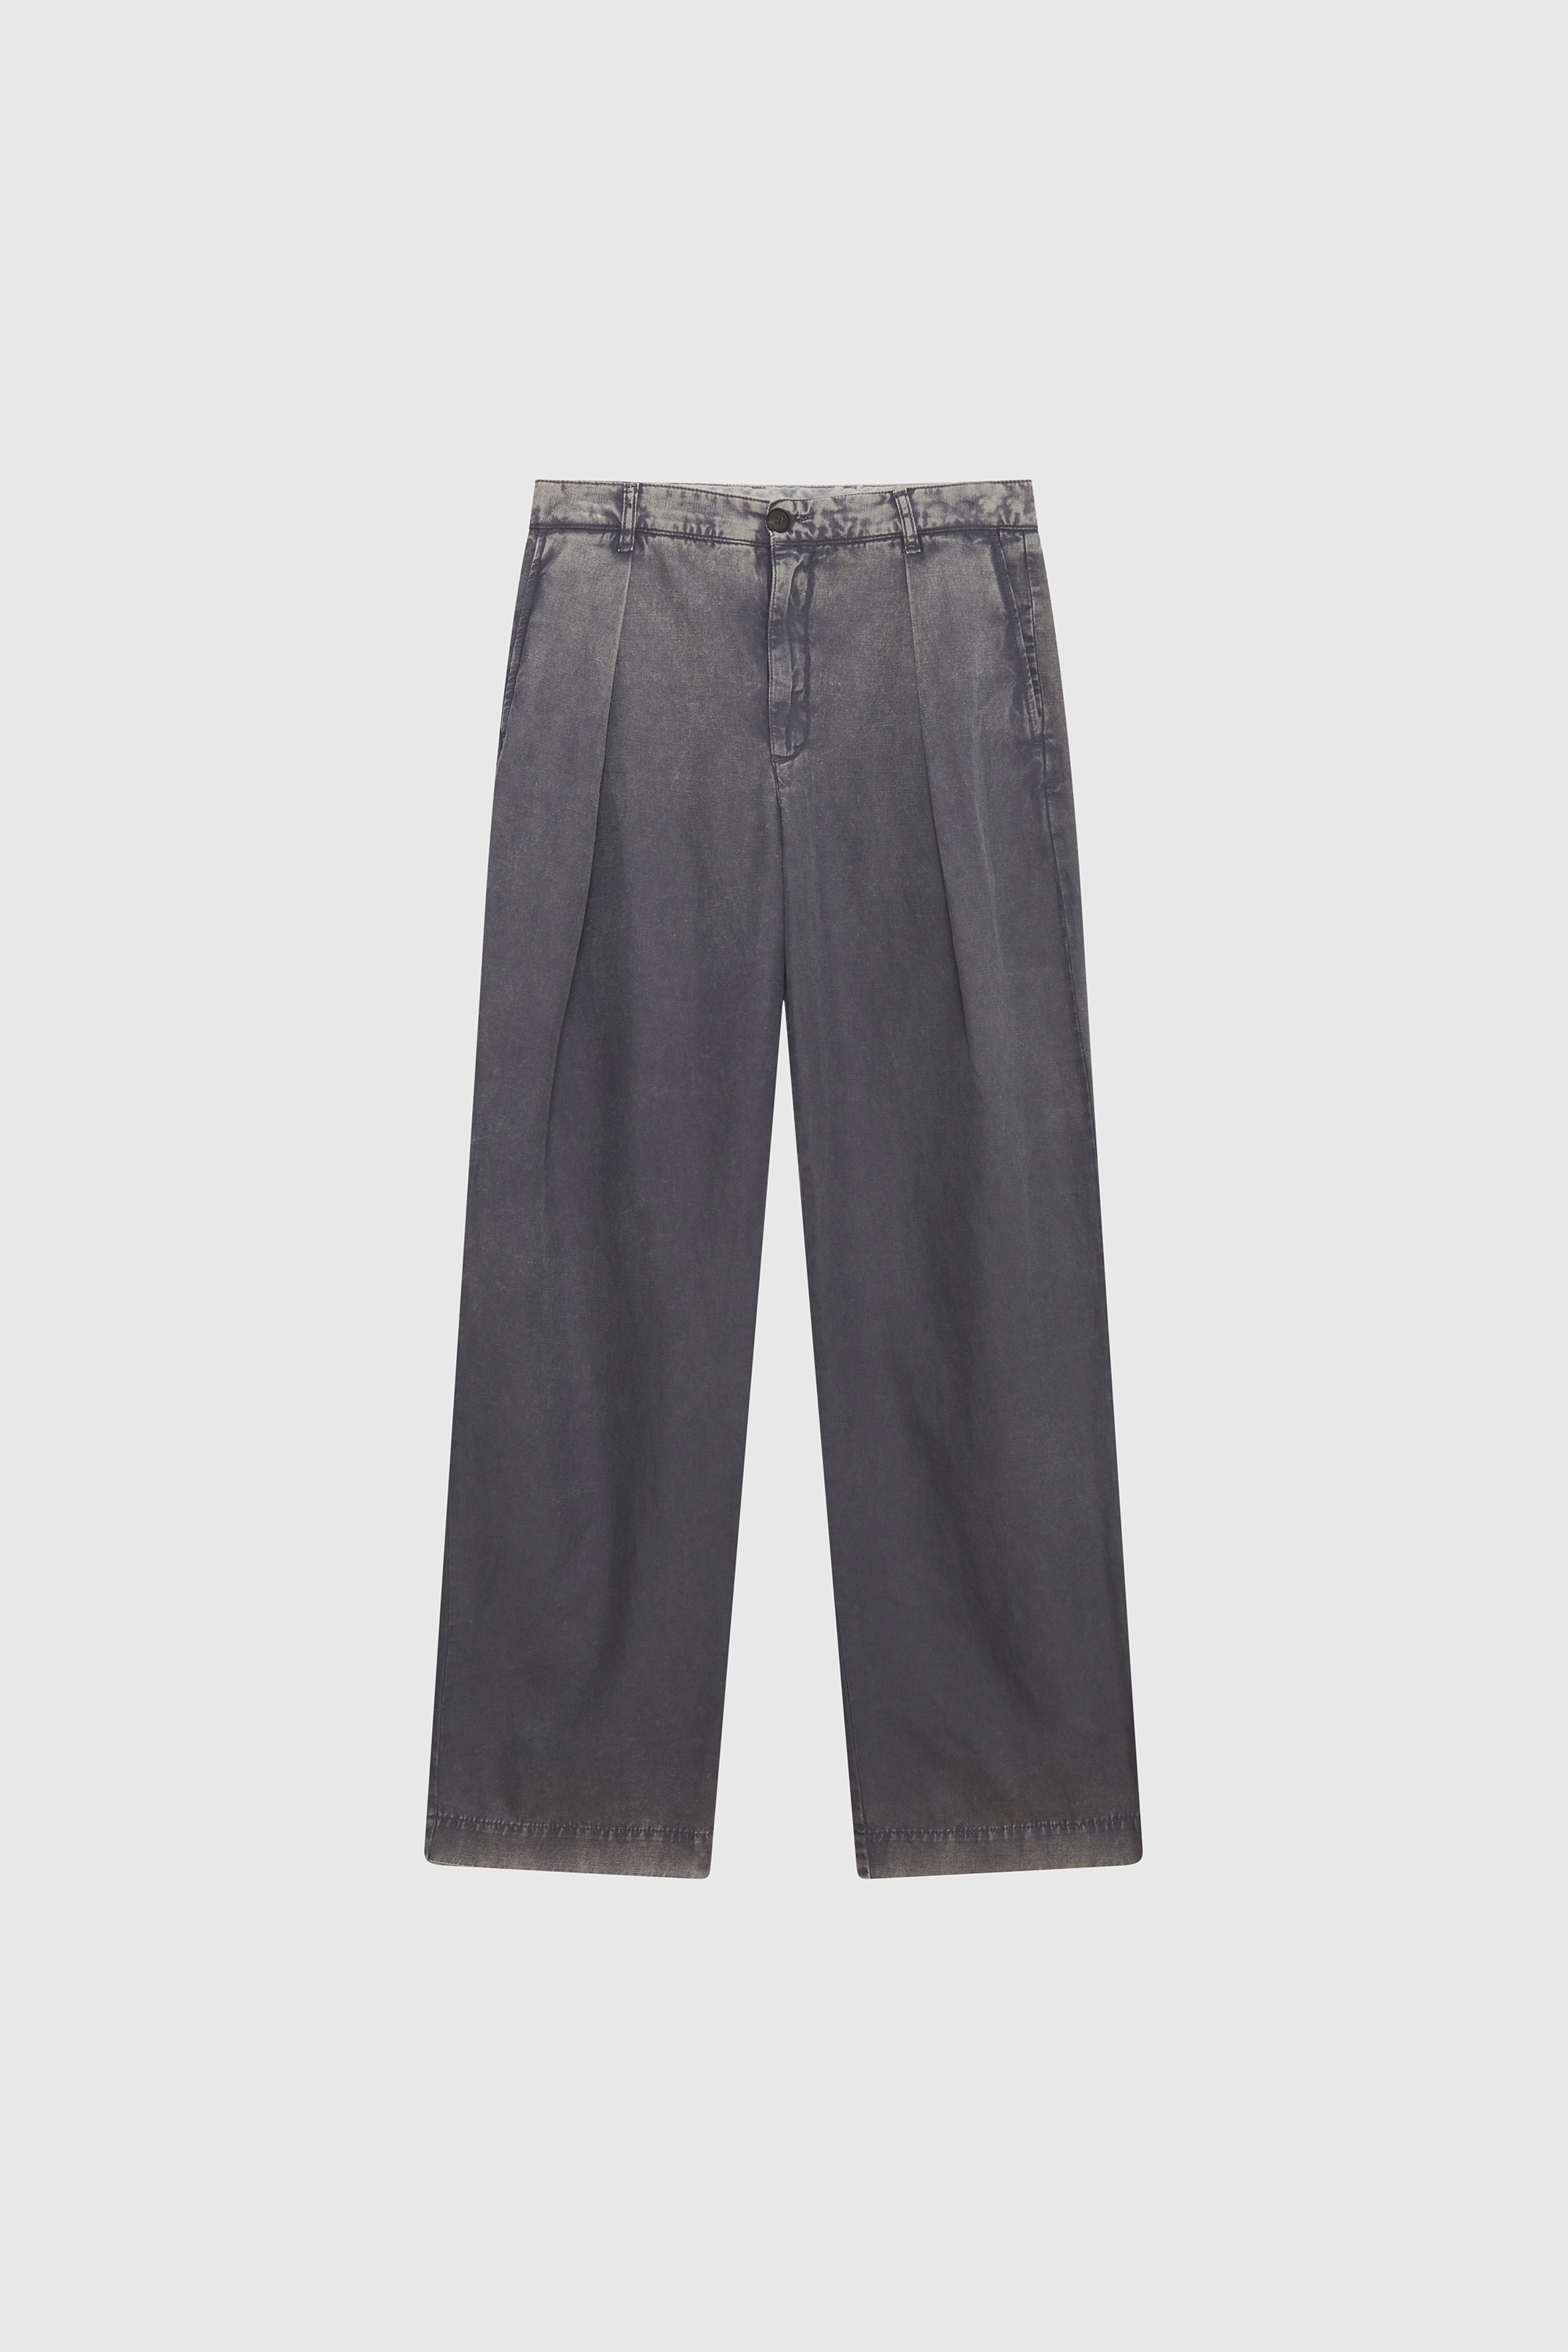 Wood Wood Fraser Pleated Chino Dusty green | WoodWood.com